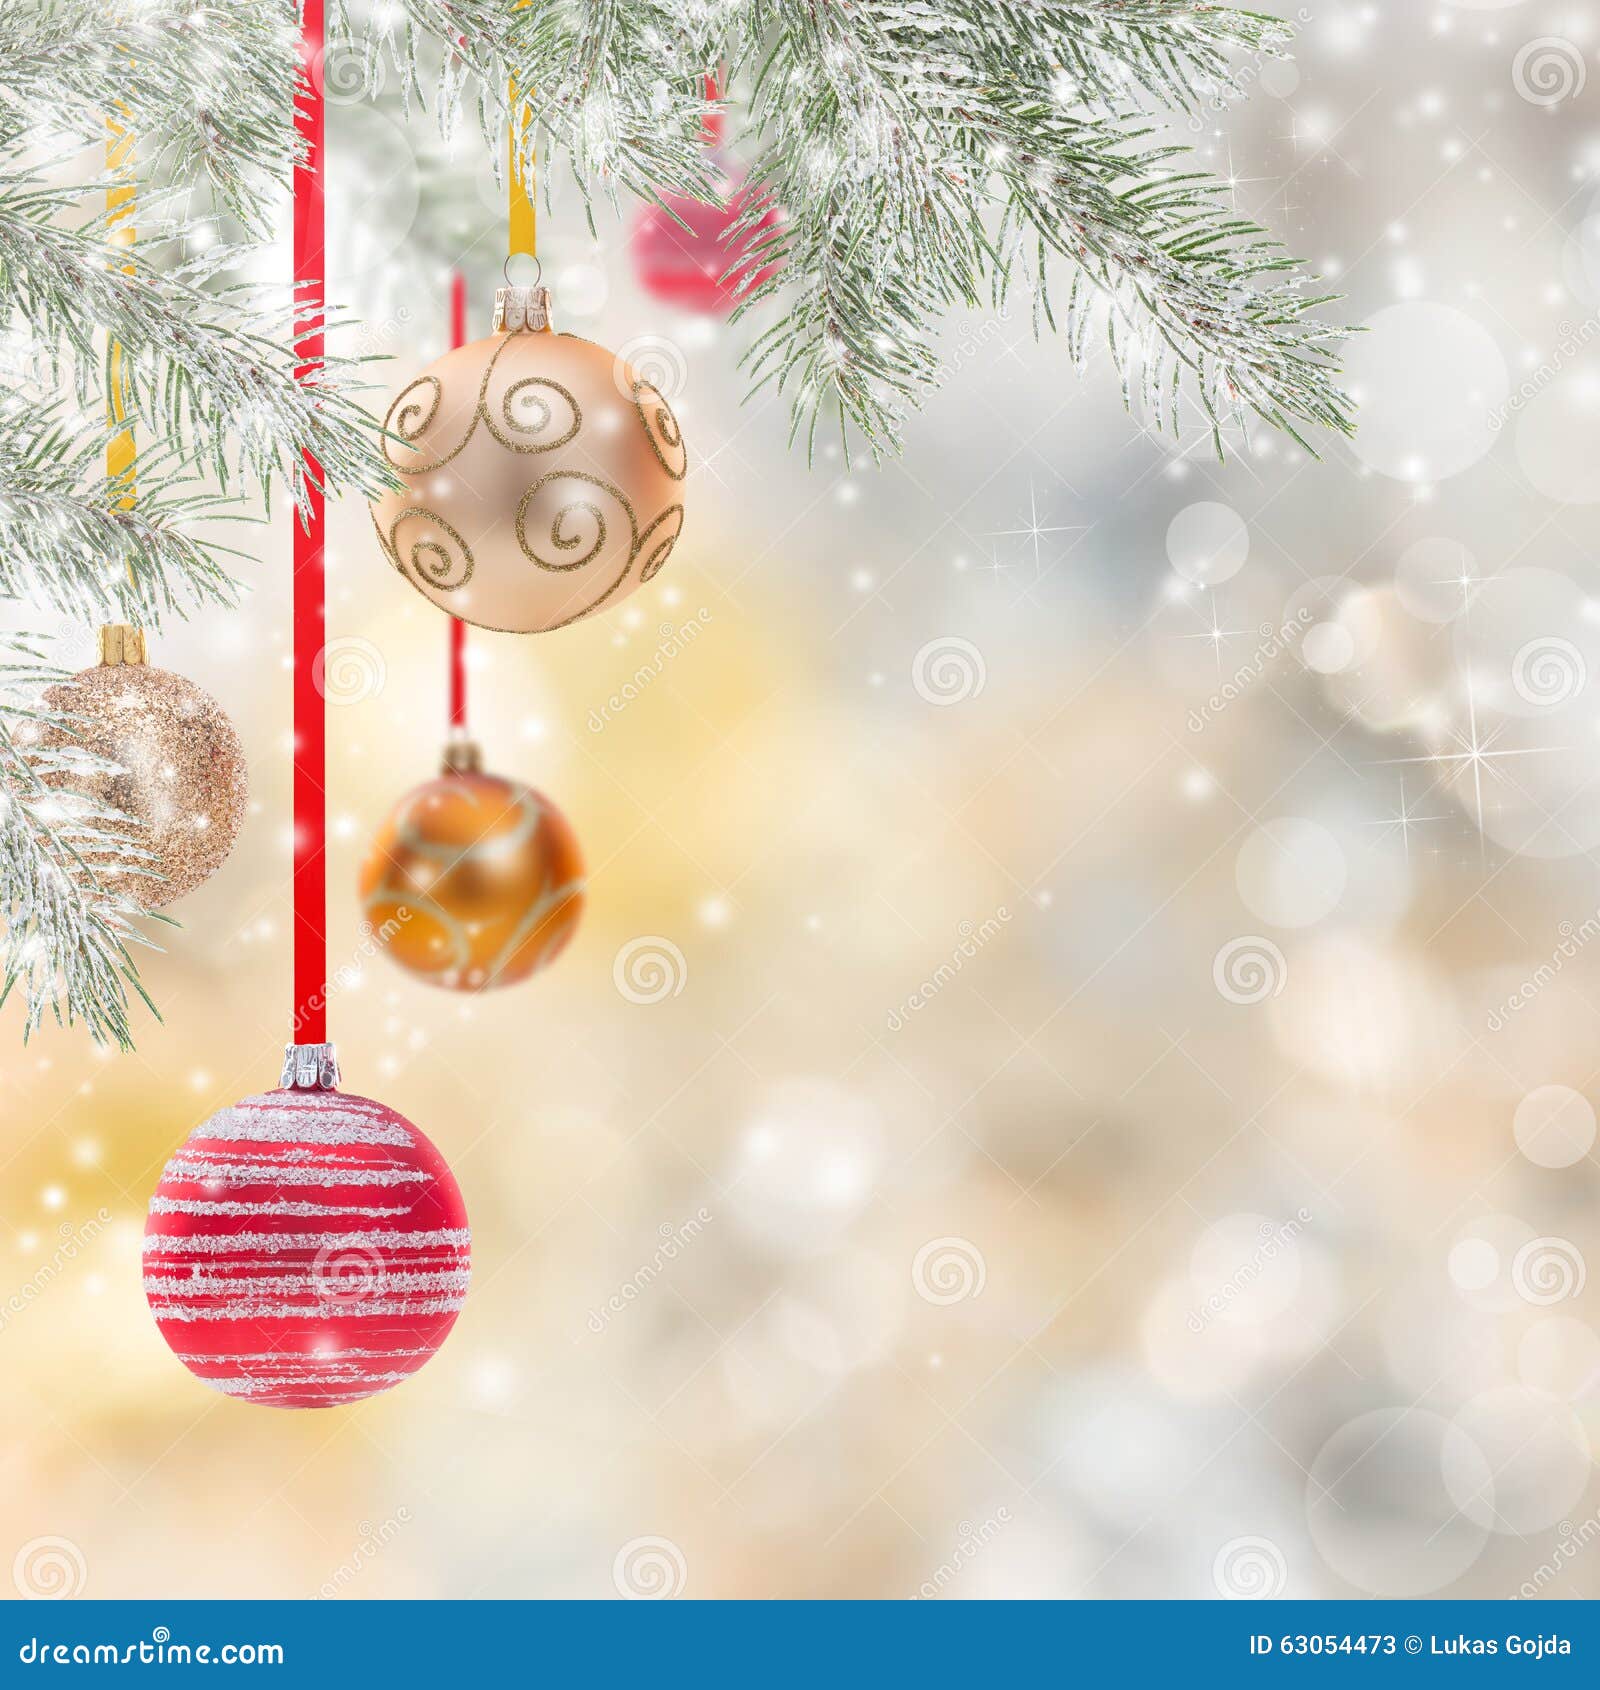 Abstract Christmas Background Stock Image - Image of freeze, card: 63054473